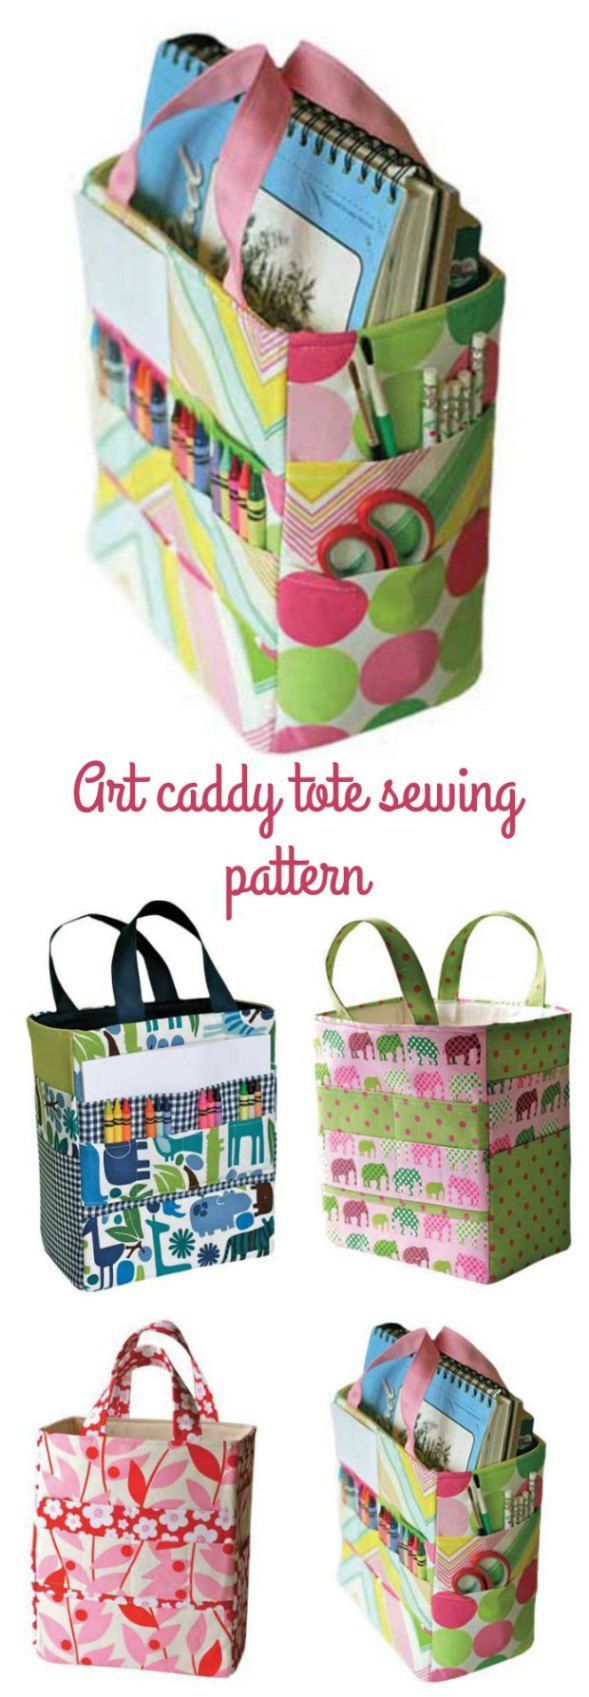 The Art Caddy Tote Sewing Pattern